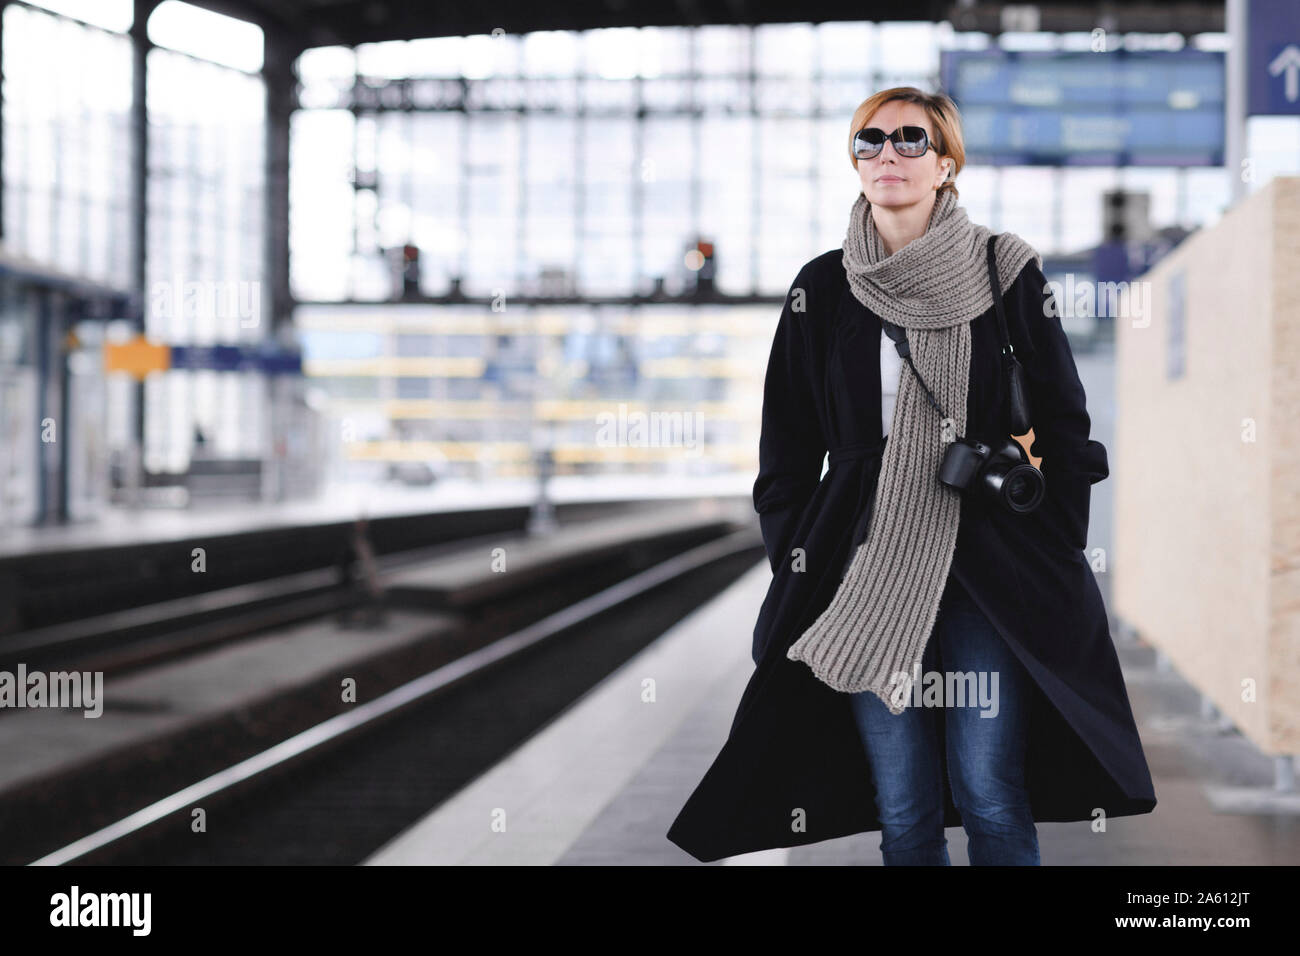 Mature woman with camera wearing black coat and large wool scarf waiting at platform Stock Photo